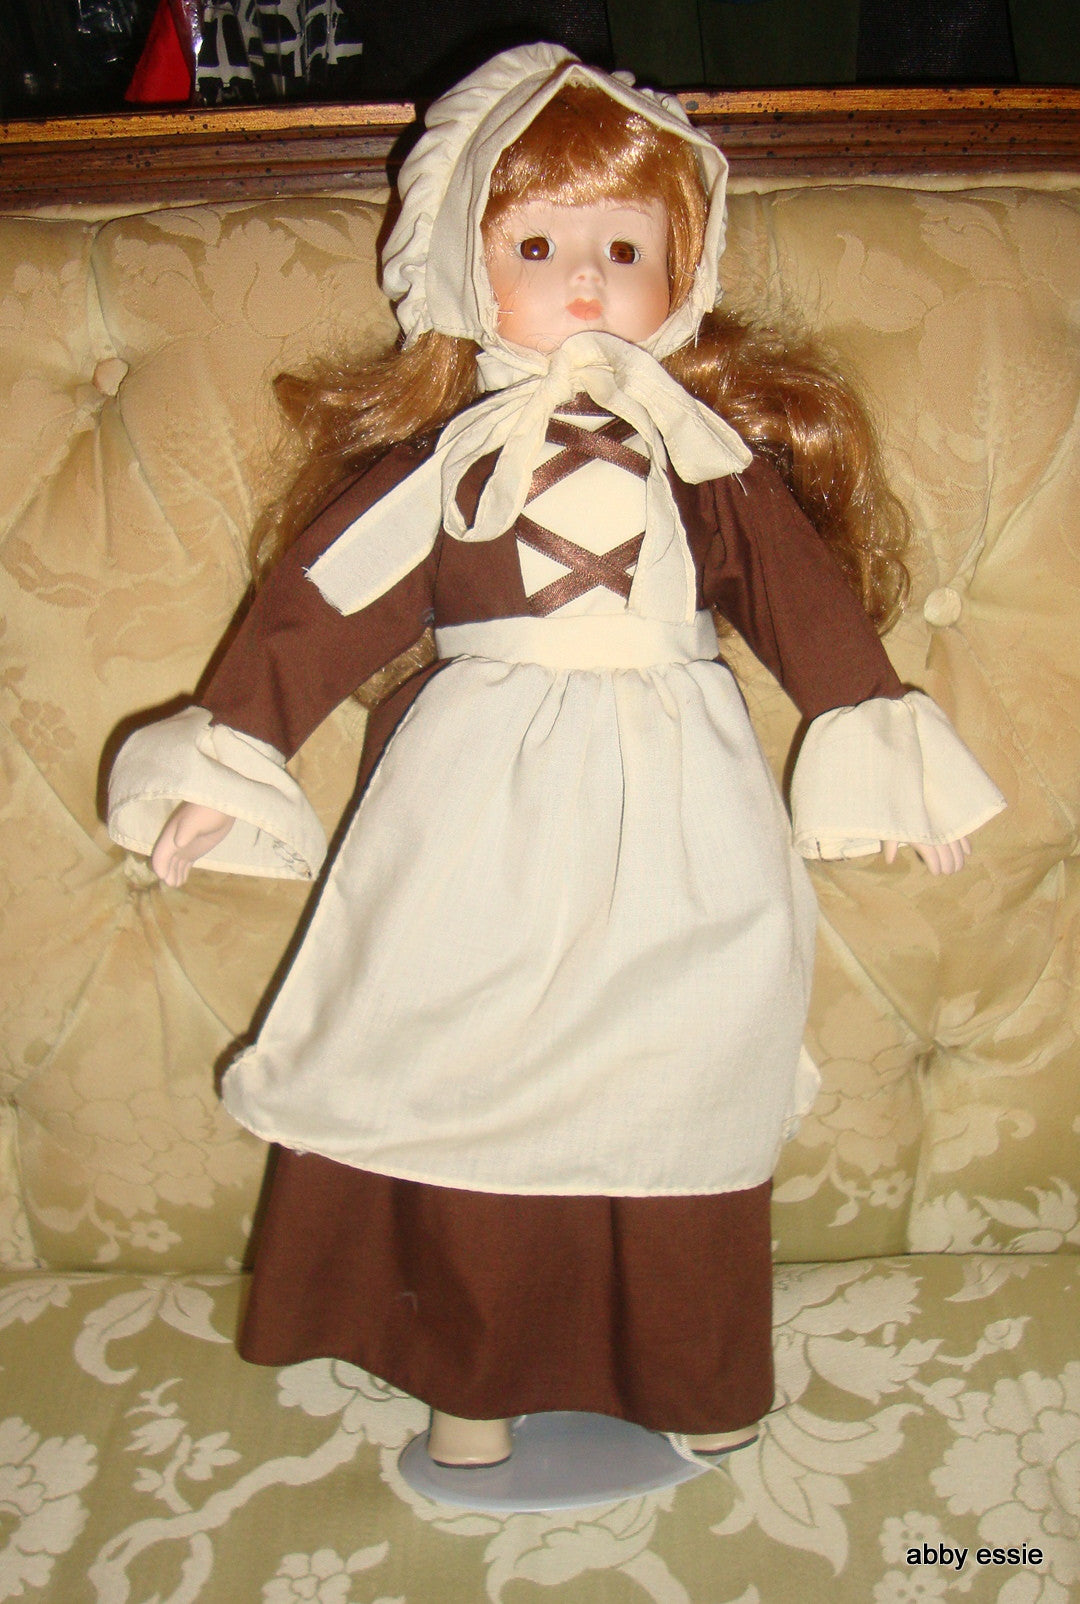 VINTAGE PORCELAIN VICTORIAN ENGLISH 19TH 18TH CENTURY DOLL ON STAND WIT Abby Essie